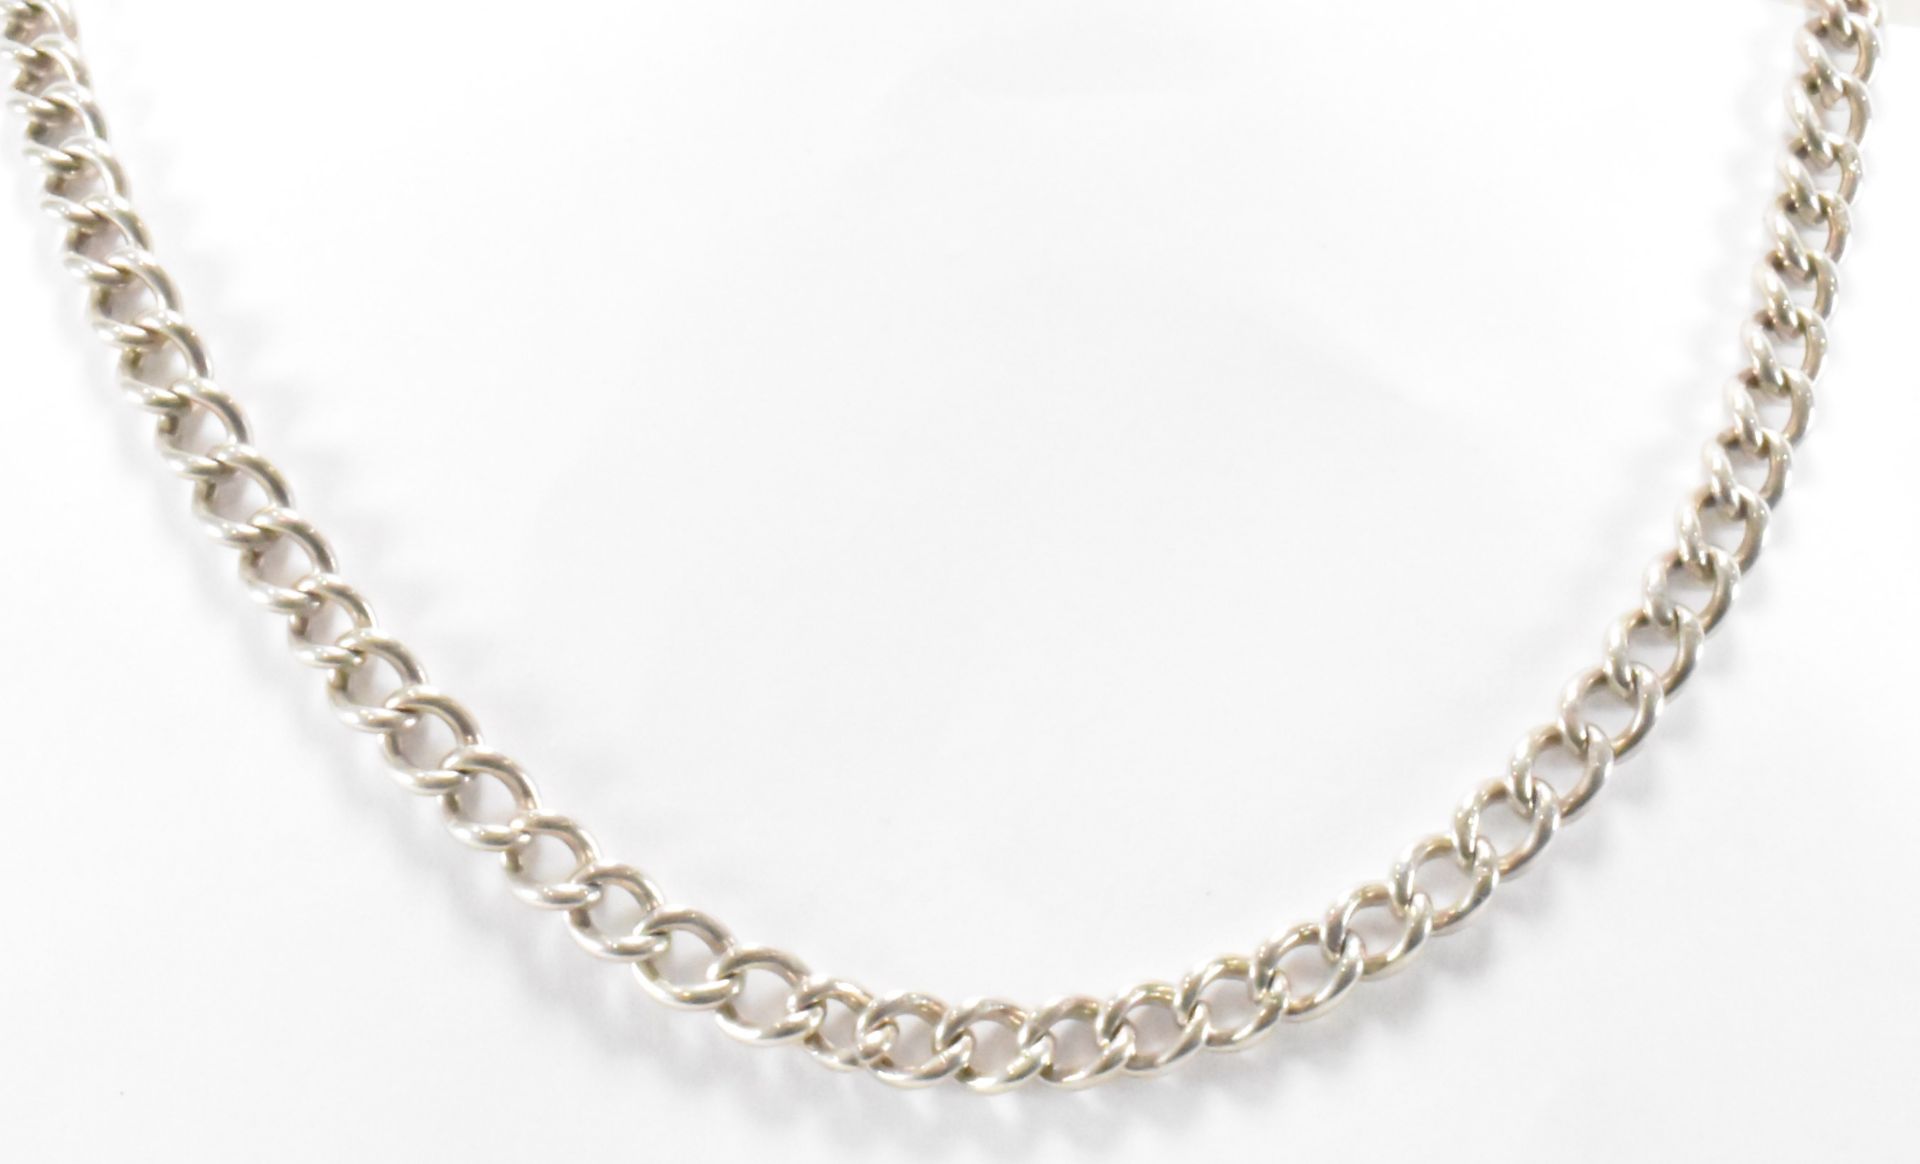 TWO SILVER NECKLACE CHAINS